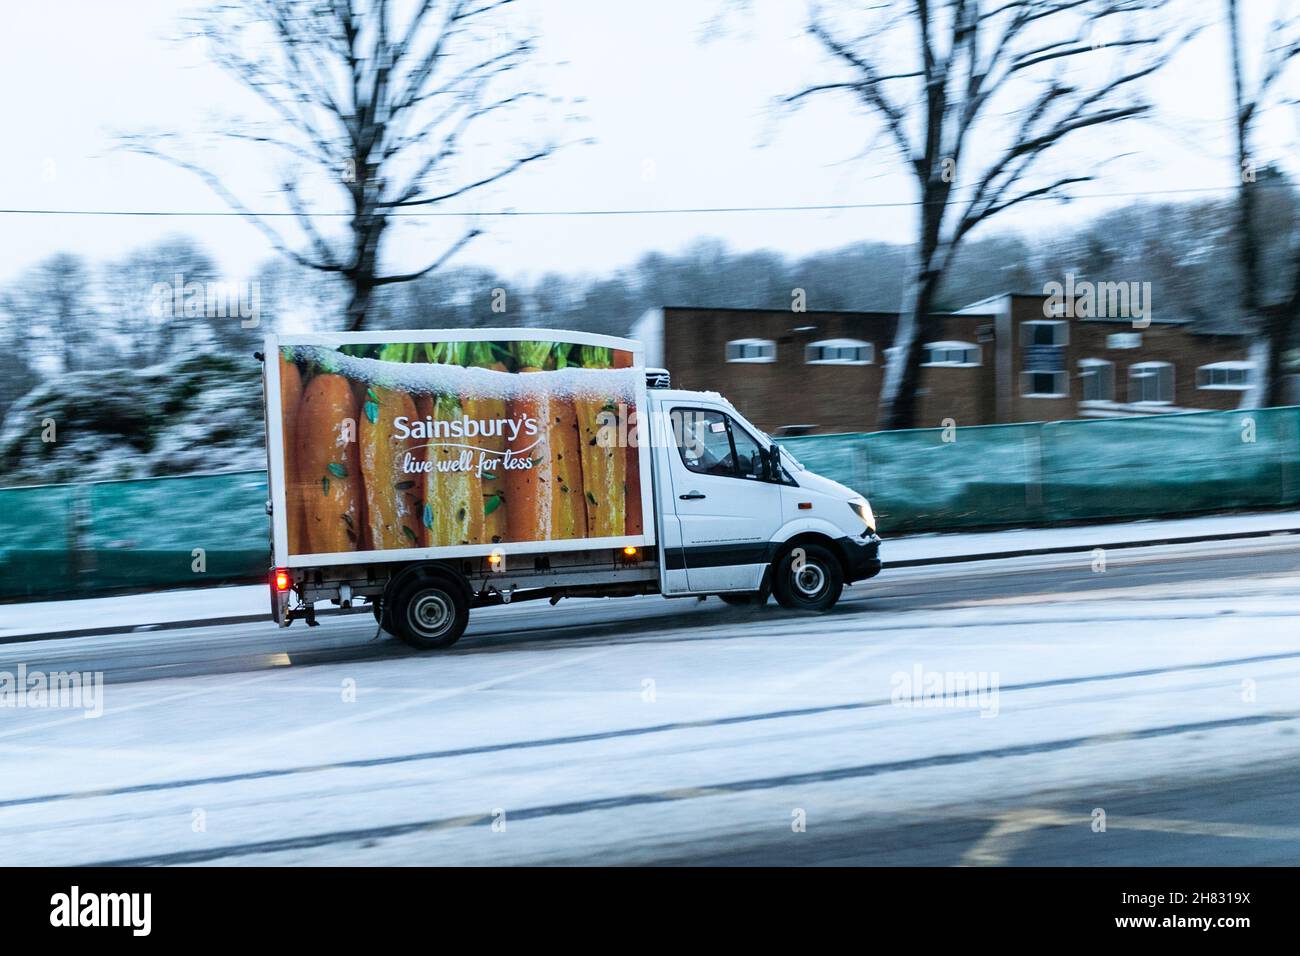 Cradley Heath, West Midlands, UK. 27th Nov, 2021. A Sainbury's delivery van makes its way up a hill as a blanket of snow hits the the roads in Cradley Heath, West Midlands, as Saturday morning traffic is thanksfully light. Road conditions are dangerous. Credit: Peter Lopeman/Alamy Live News Stock Photo